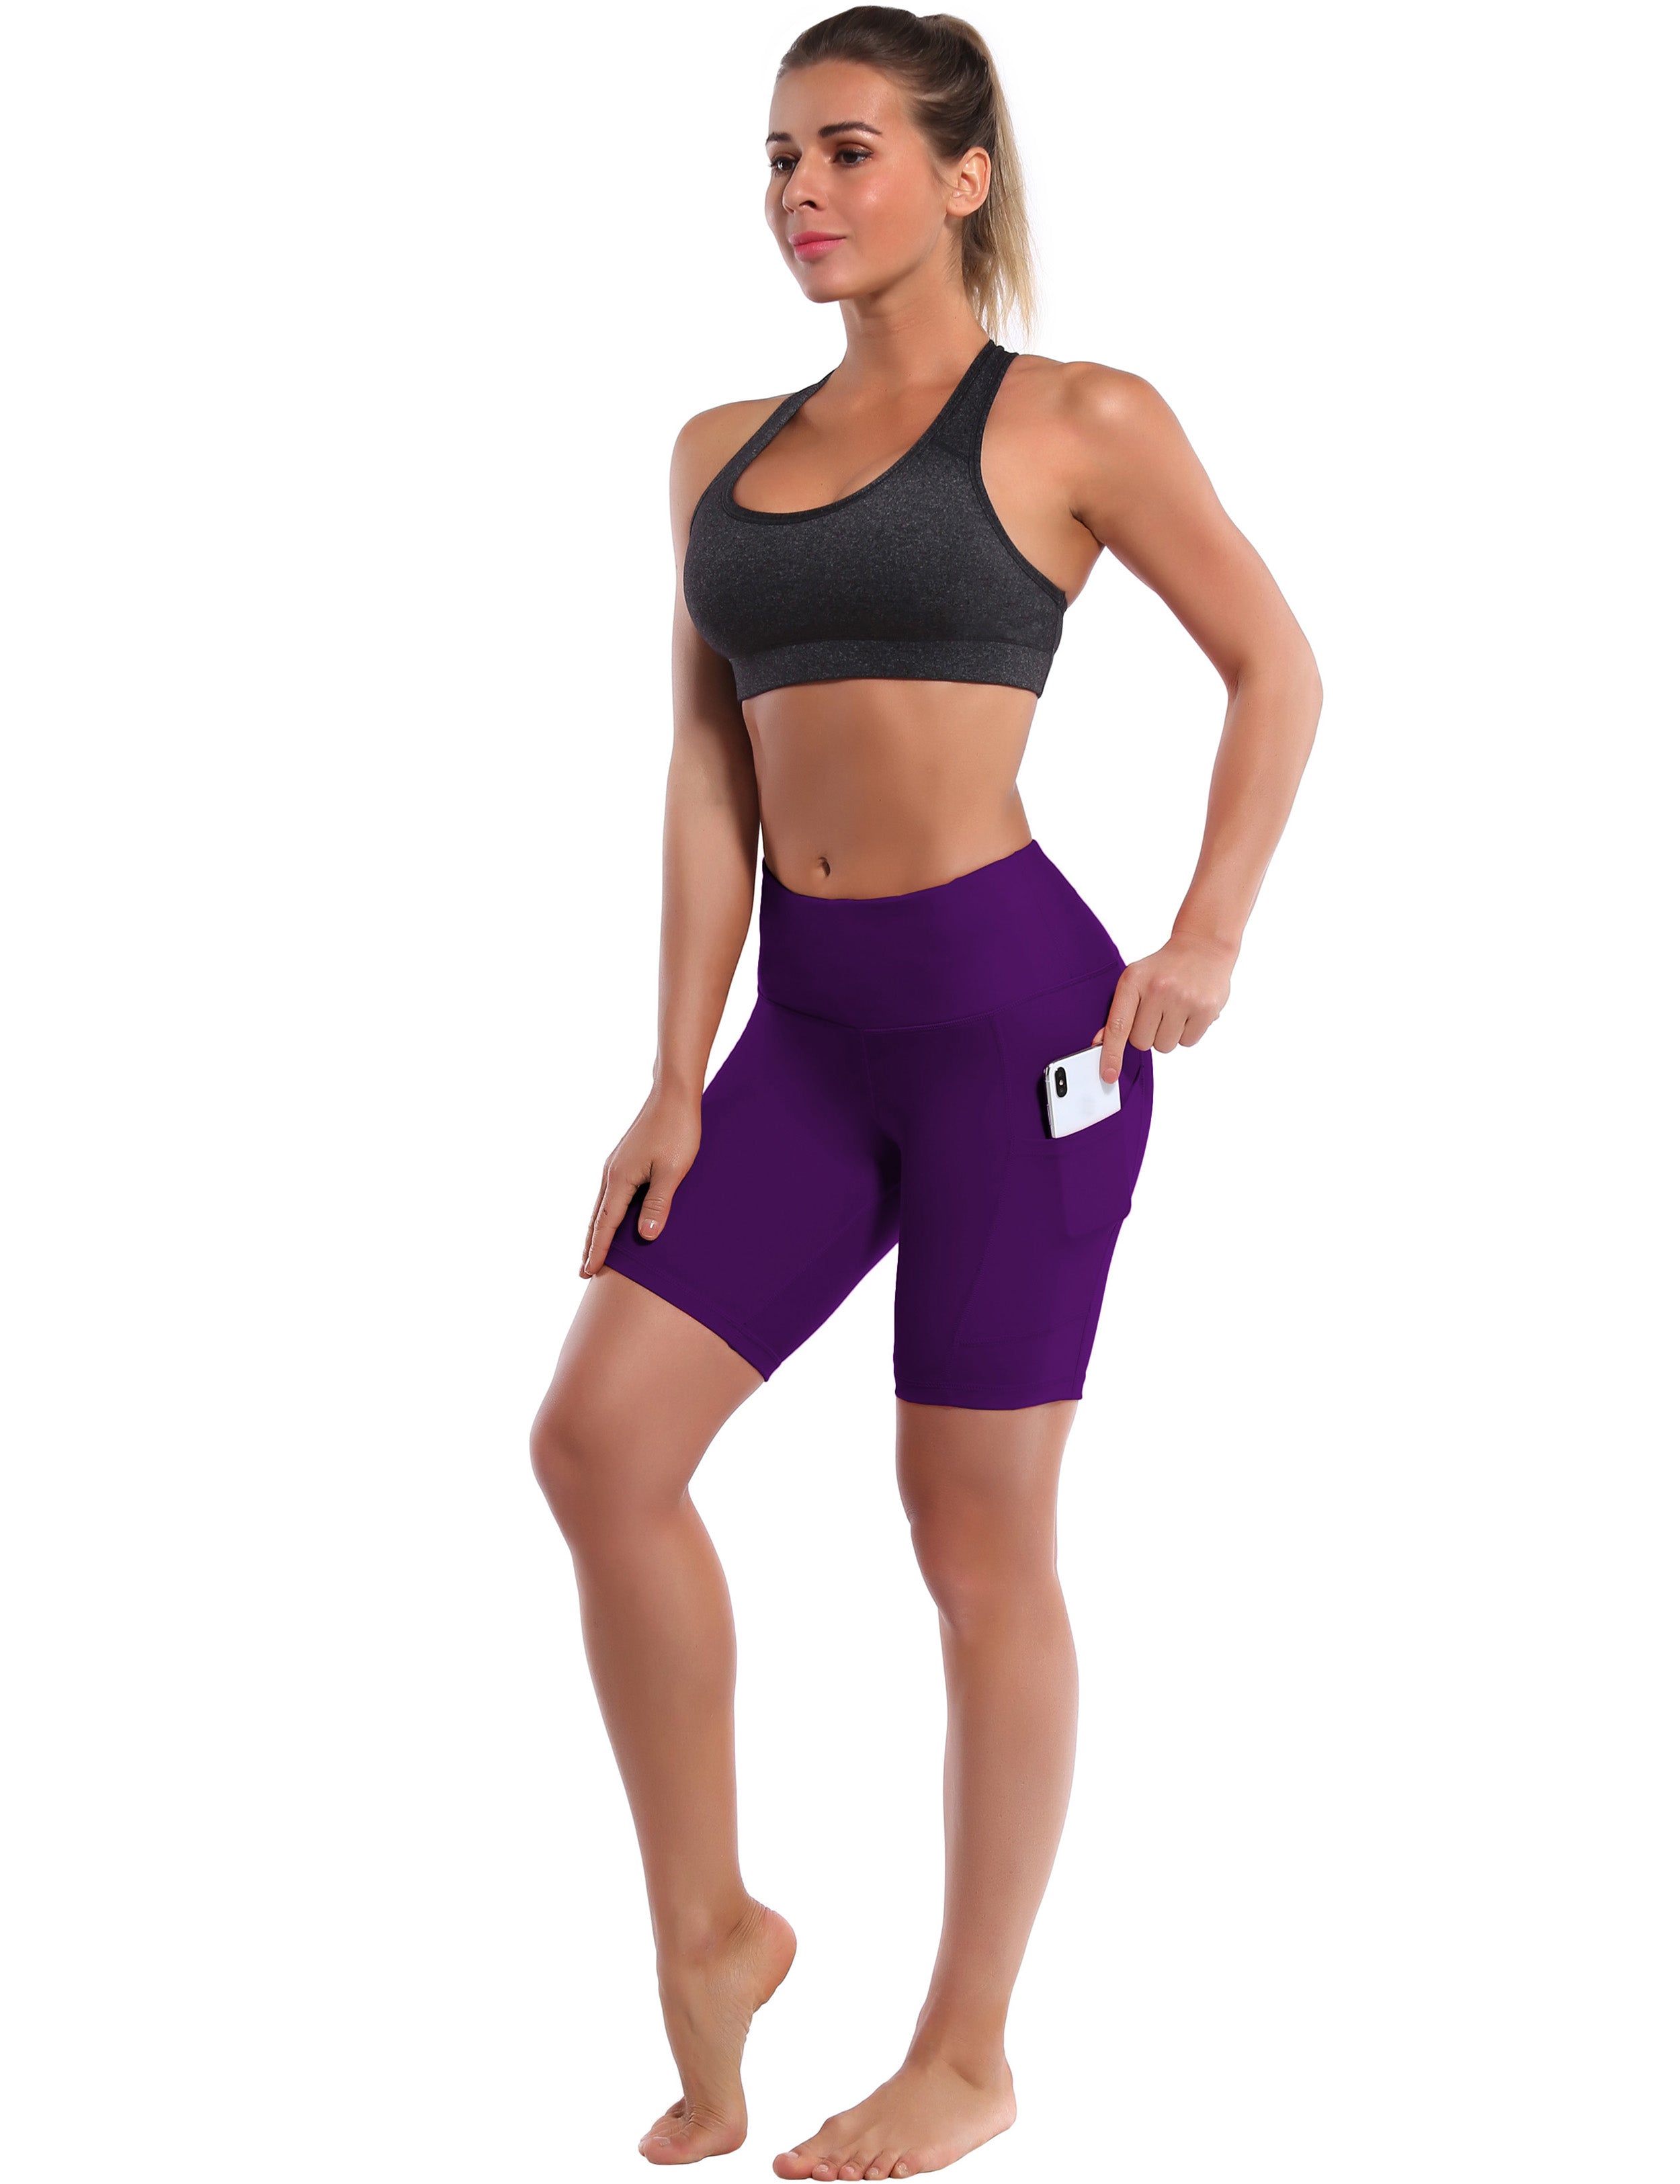 8" Side Pockets Yoga Shorts eggplantpurple Sleek, soft, smooth and totally comfortable: our newest style is here. Softest-ever fabric High elasticity High density 4-way stretch Fabric doesn't attract lint easily No see-through Moisture-wicking Machine wash 75% Nylon, 25% Spandex